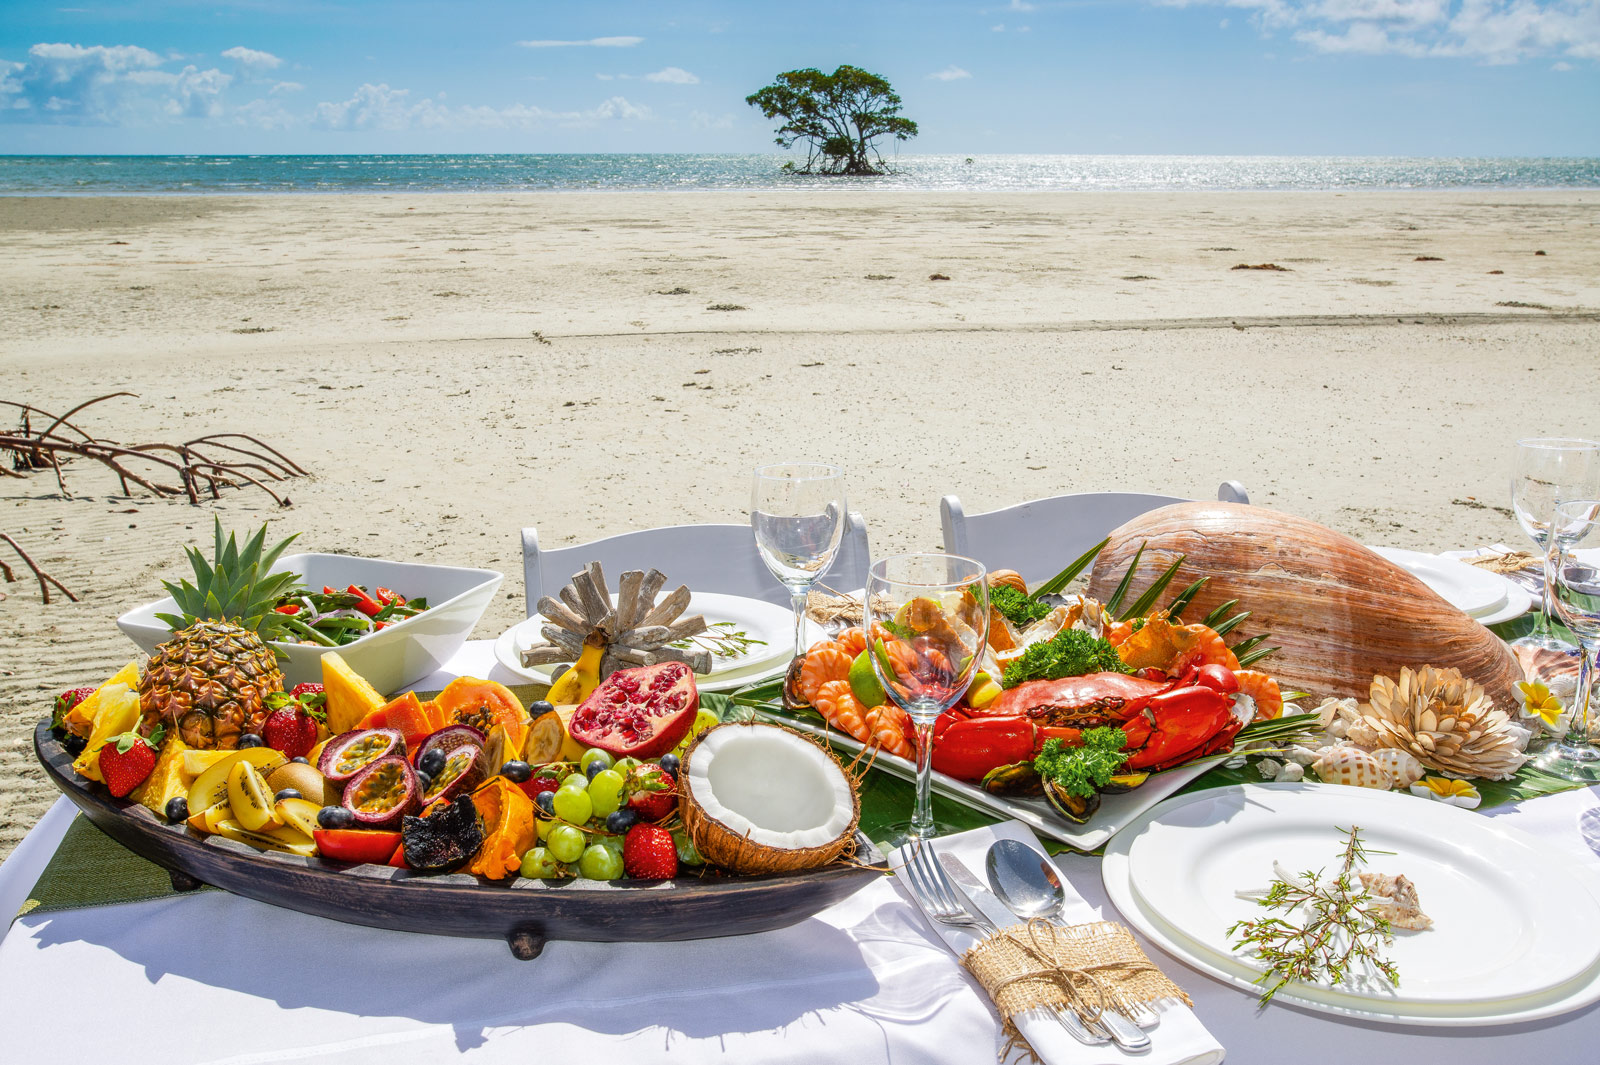 Food Tourism A Lucrative Venture Fueling the Travel Industry